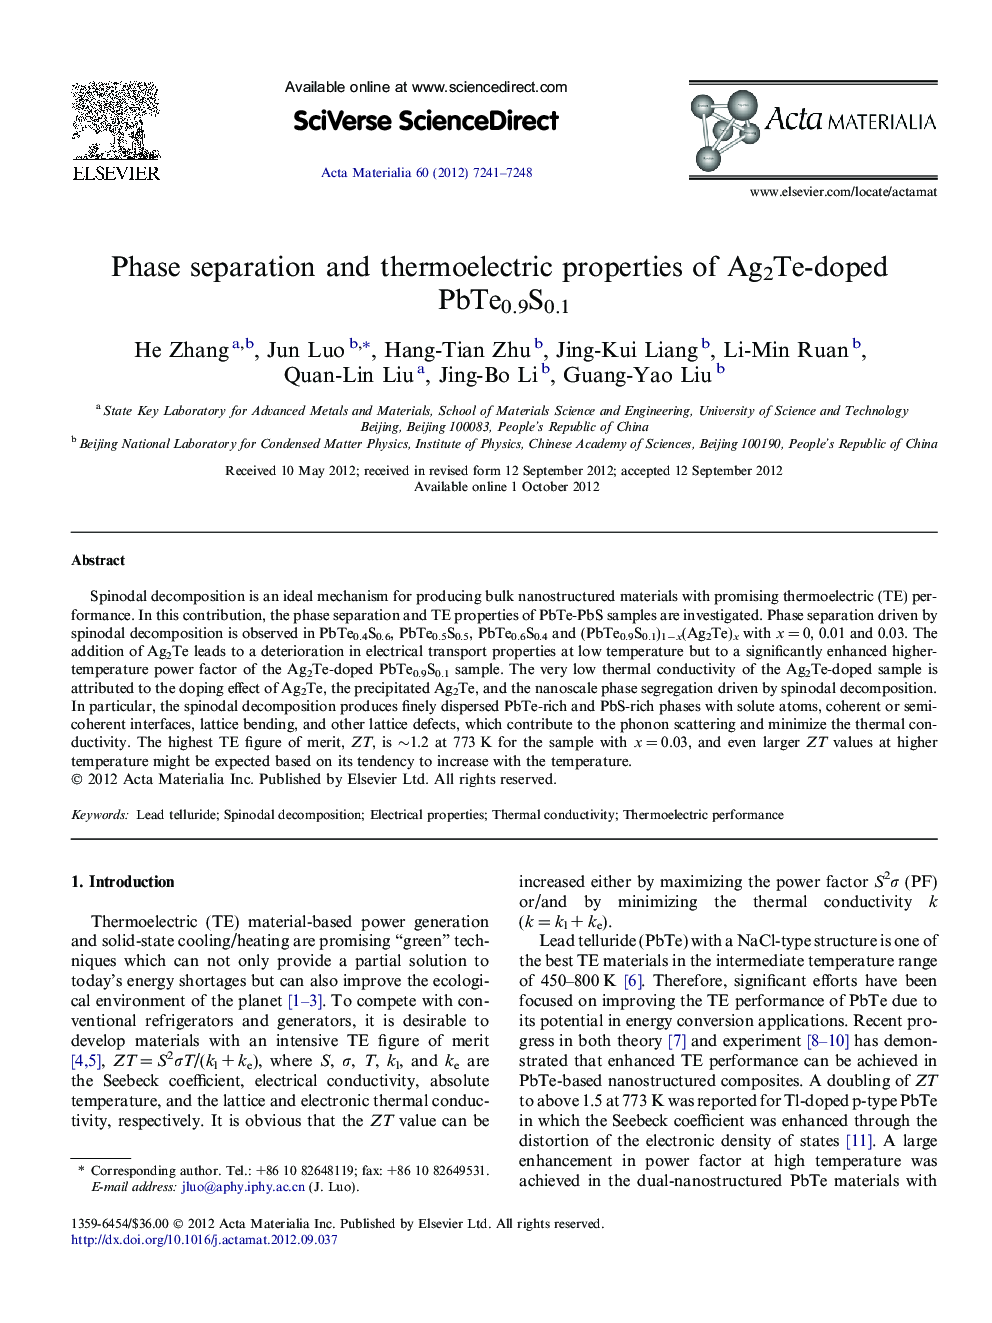 Phase separation and thermoelectric properties of Ag2Te-doped PbTe0.9S0.1